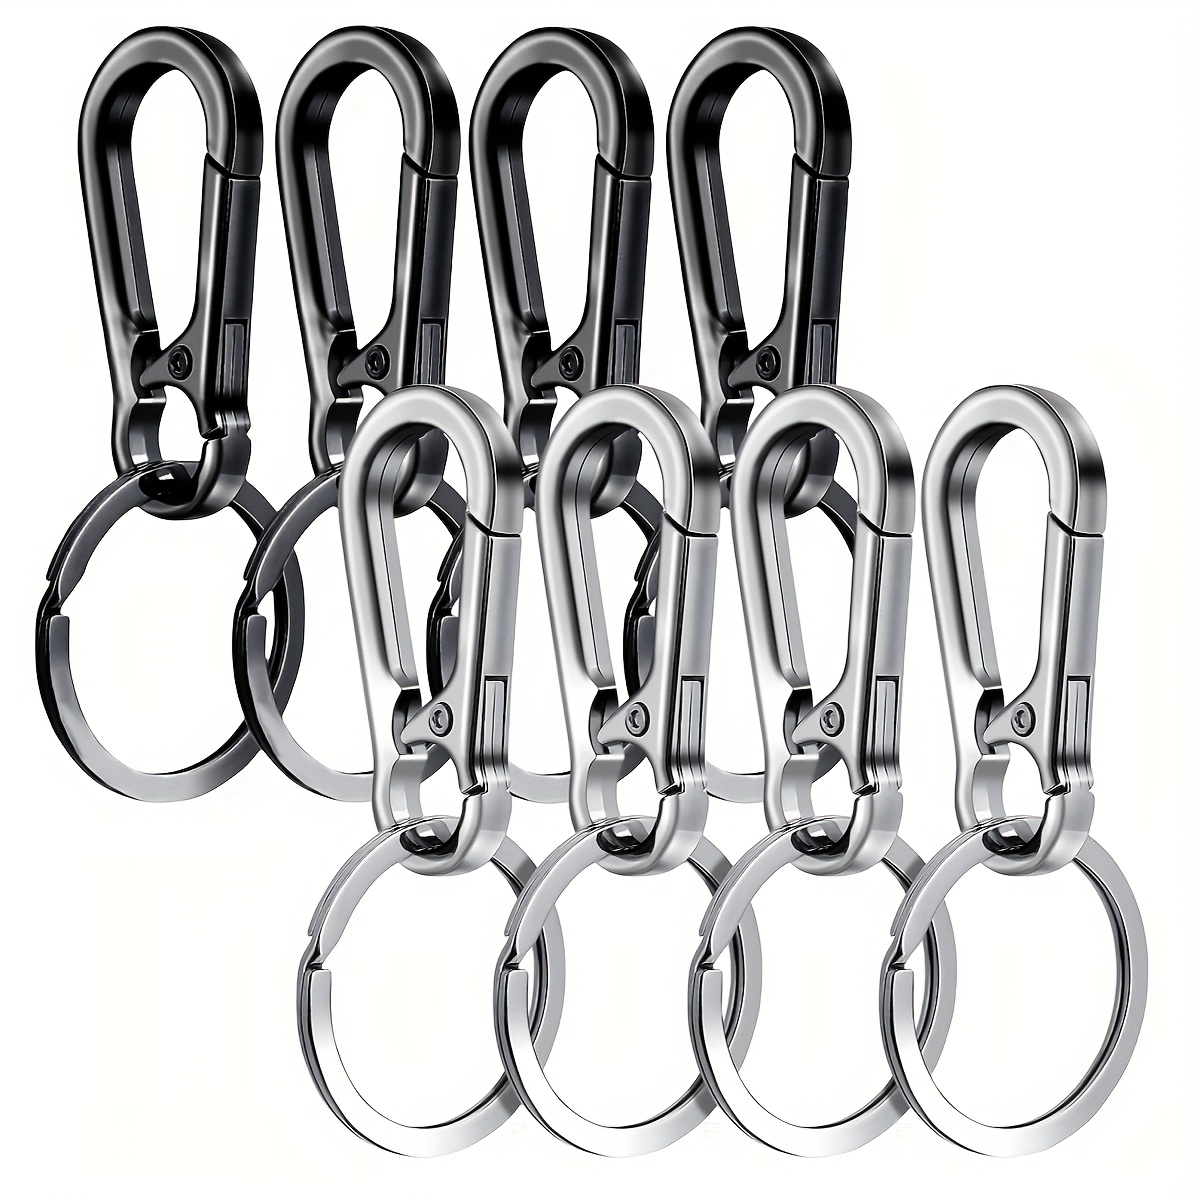 

8pcs Keychain Clips, Carabiner Key Ring, Metal Snap Hook With Keyring, 2.76 Inches/7cm Length, 1.18 Inches/3cm Width, Multipurpose Quick Release Key Holder, Secure Lock